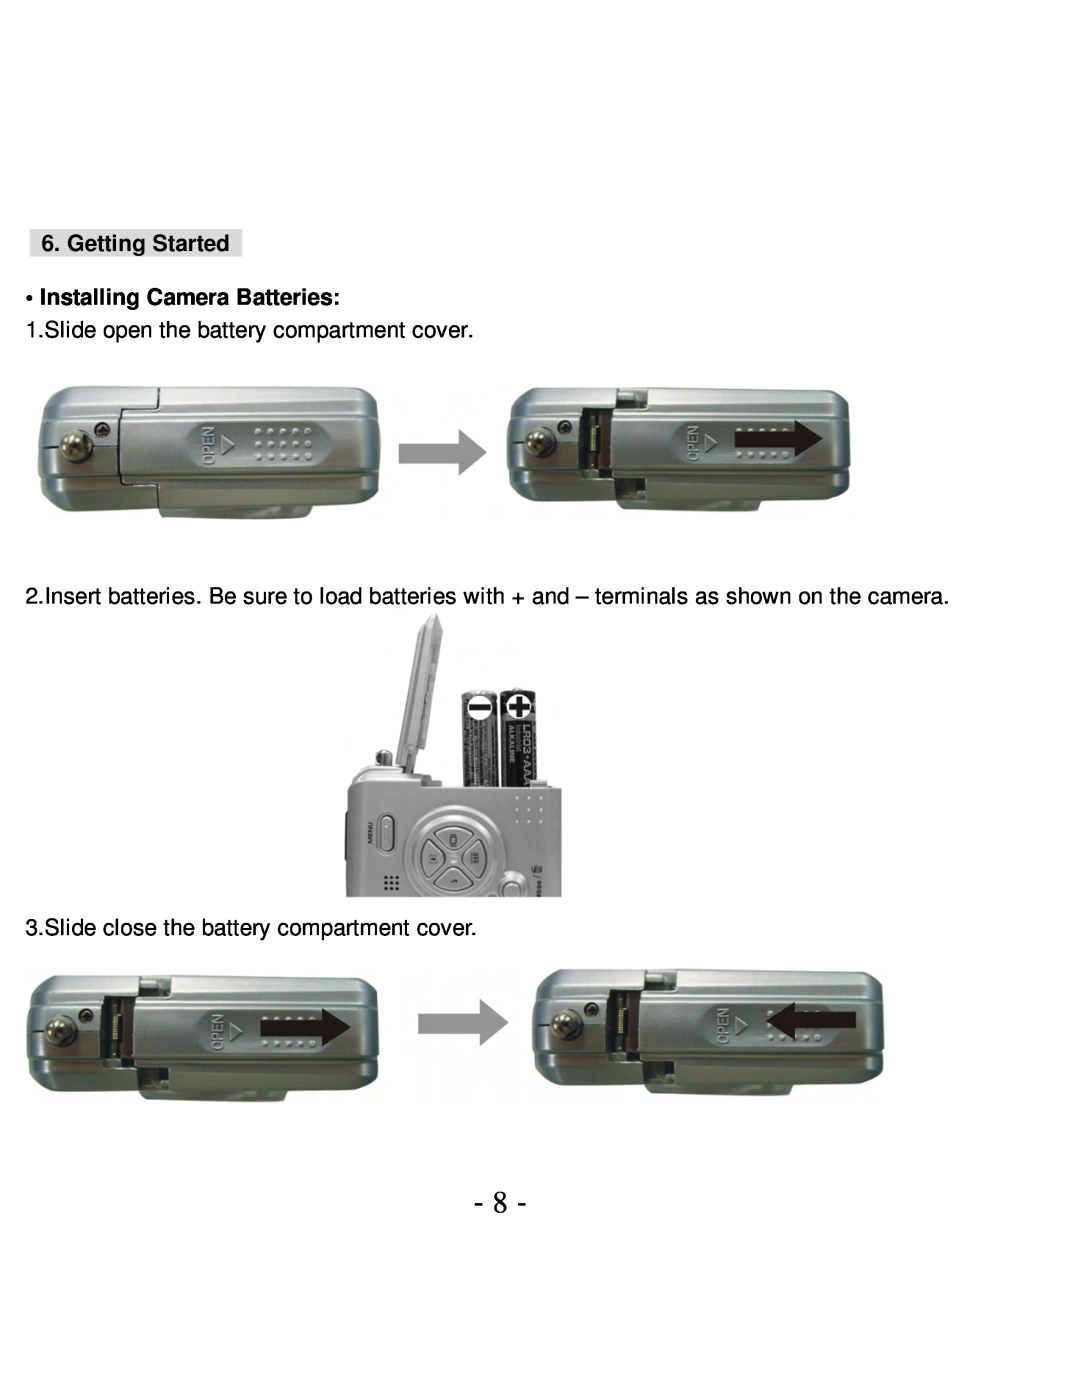 VistaQuest VQ5015 user manual Getting Started Installing Camera Batteries, Slide open the battery compartment cover 